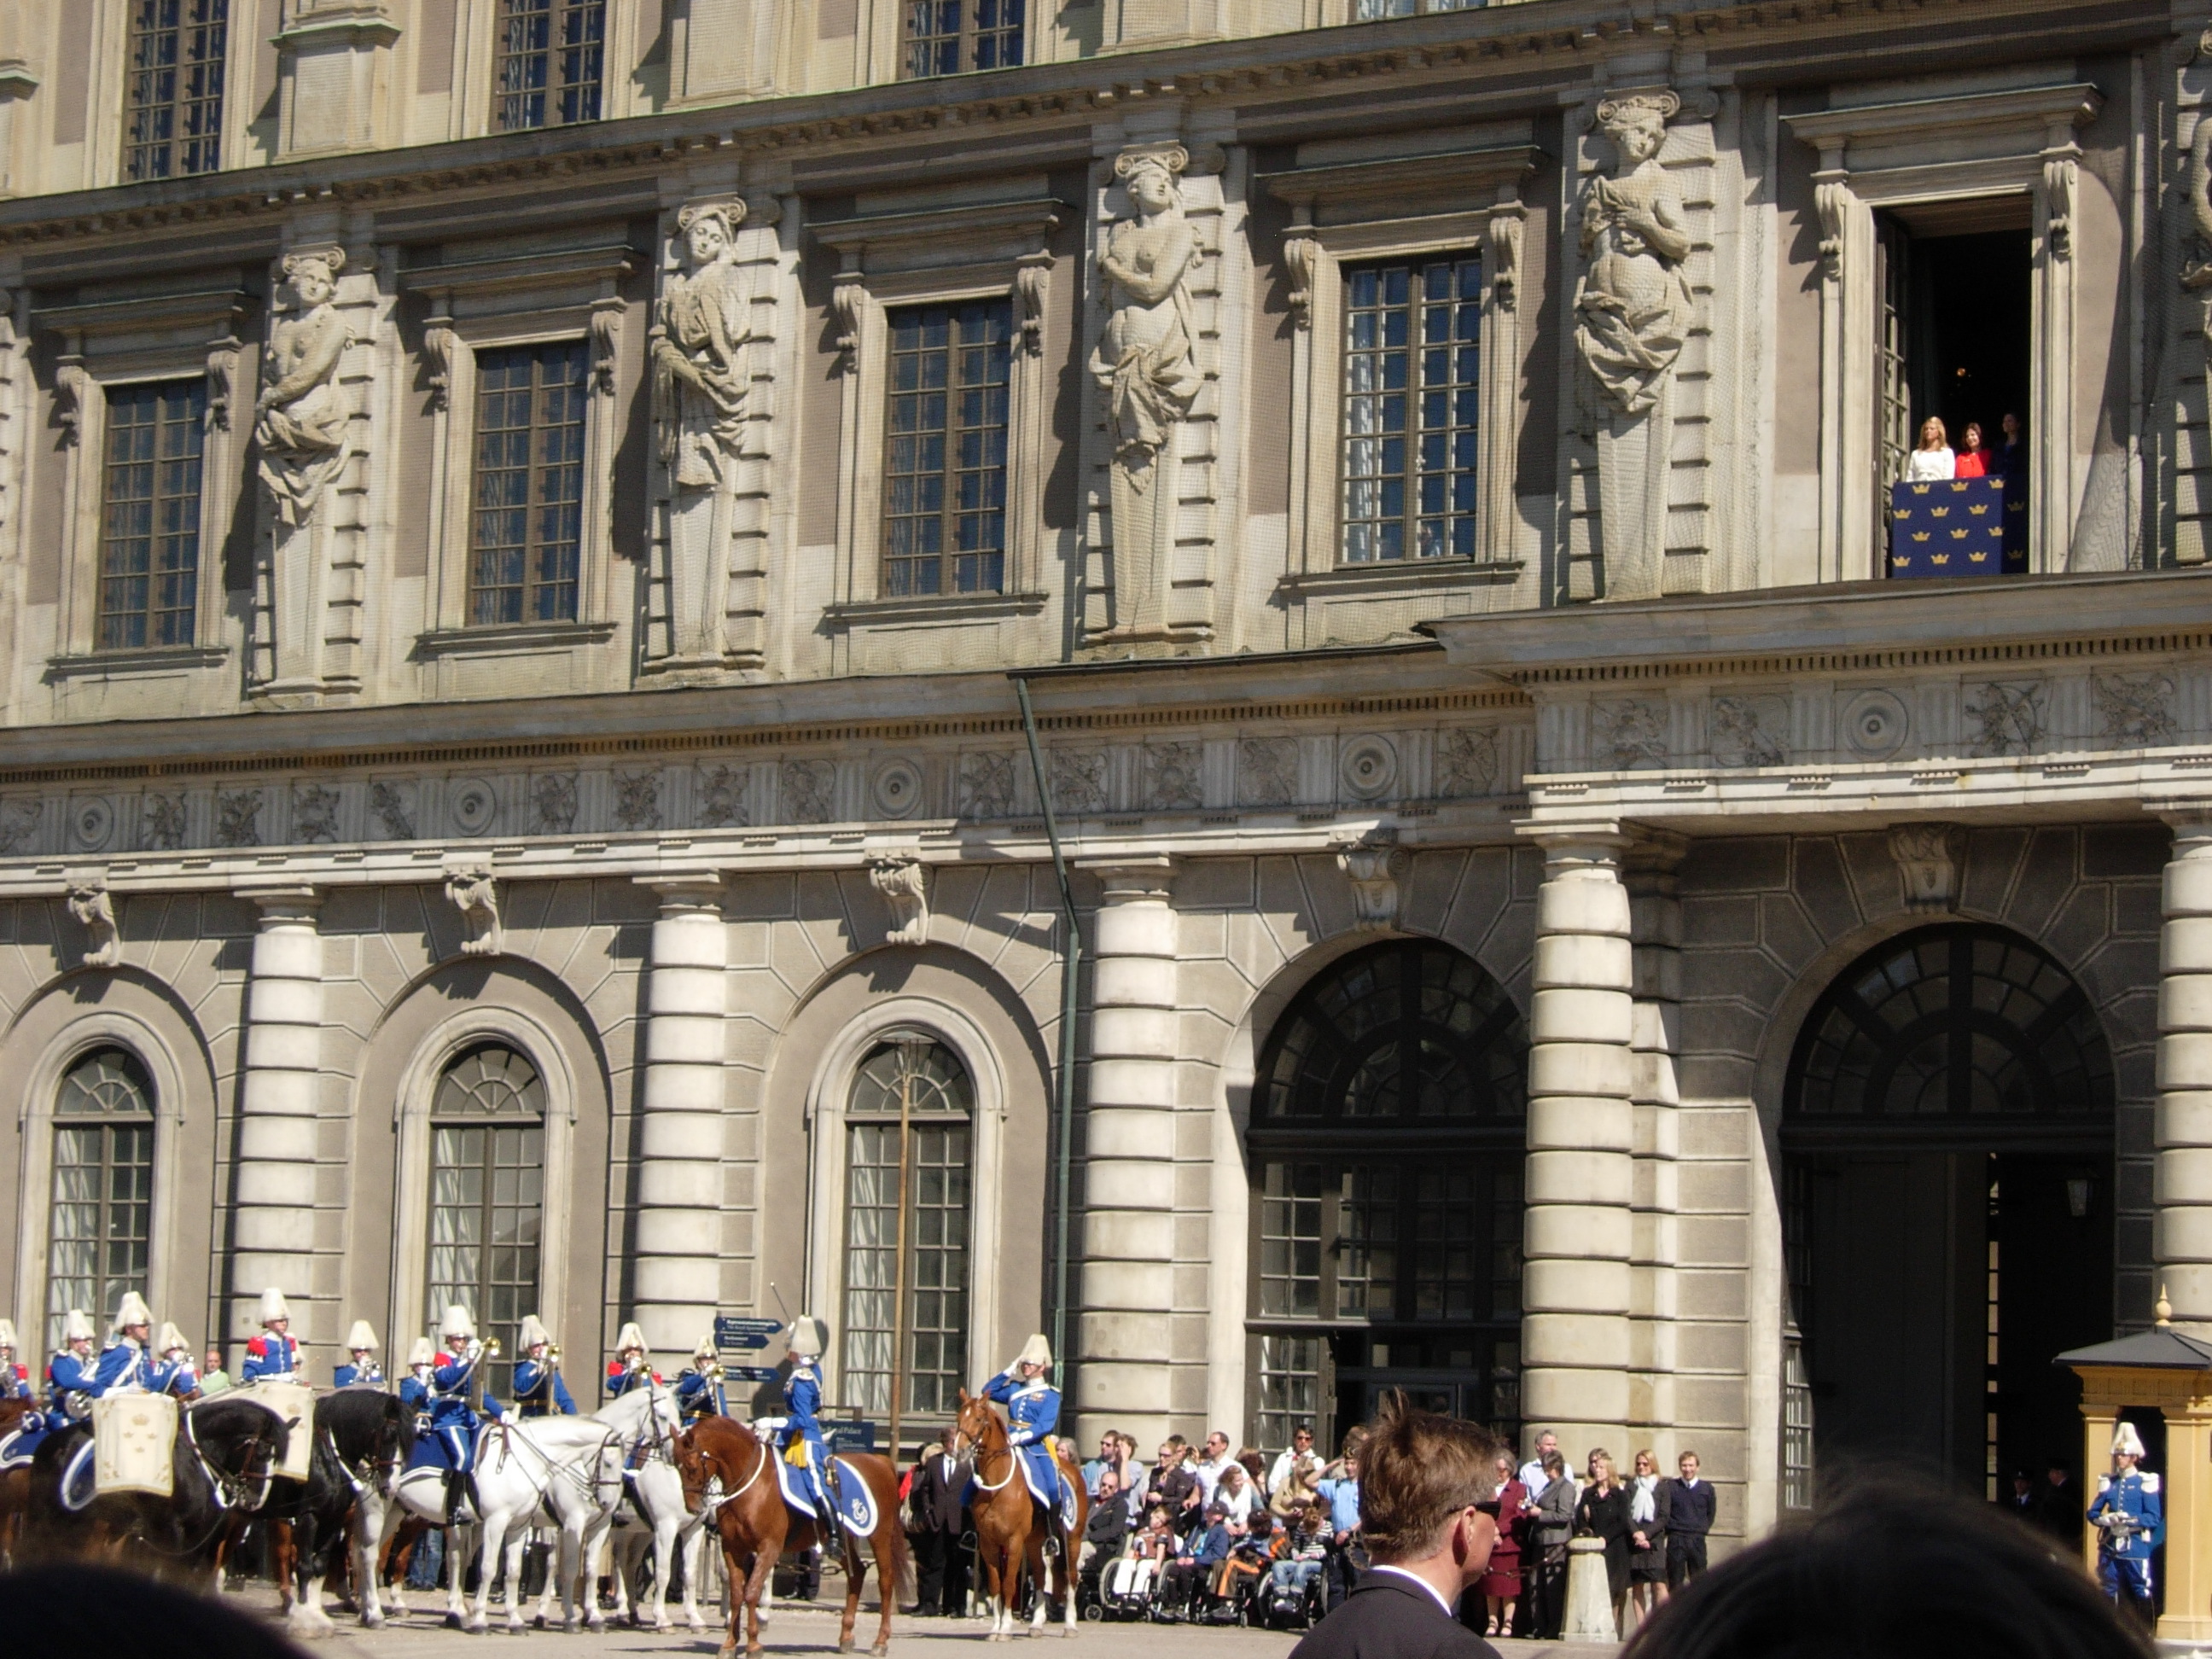 Another view of the celebrations. The tiny figures in the window on the right are Princess Madeleine and Queen Silvia.